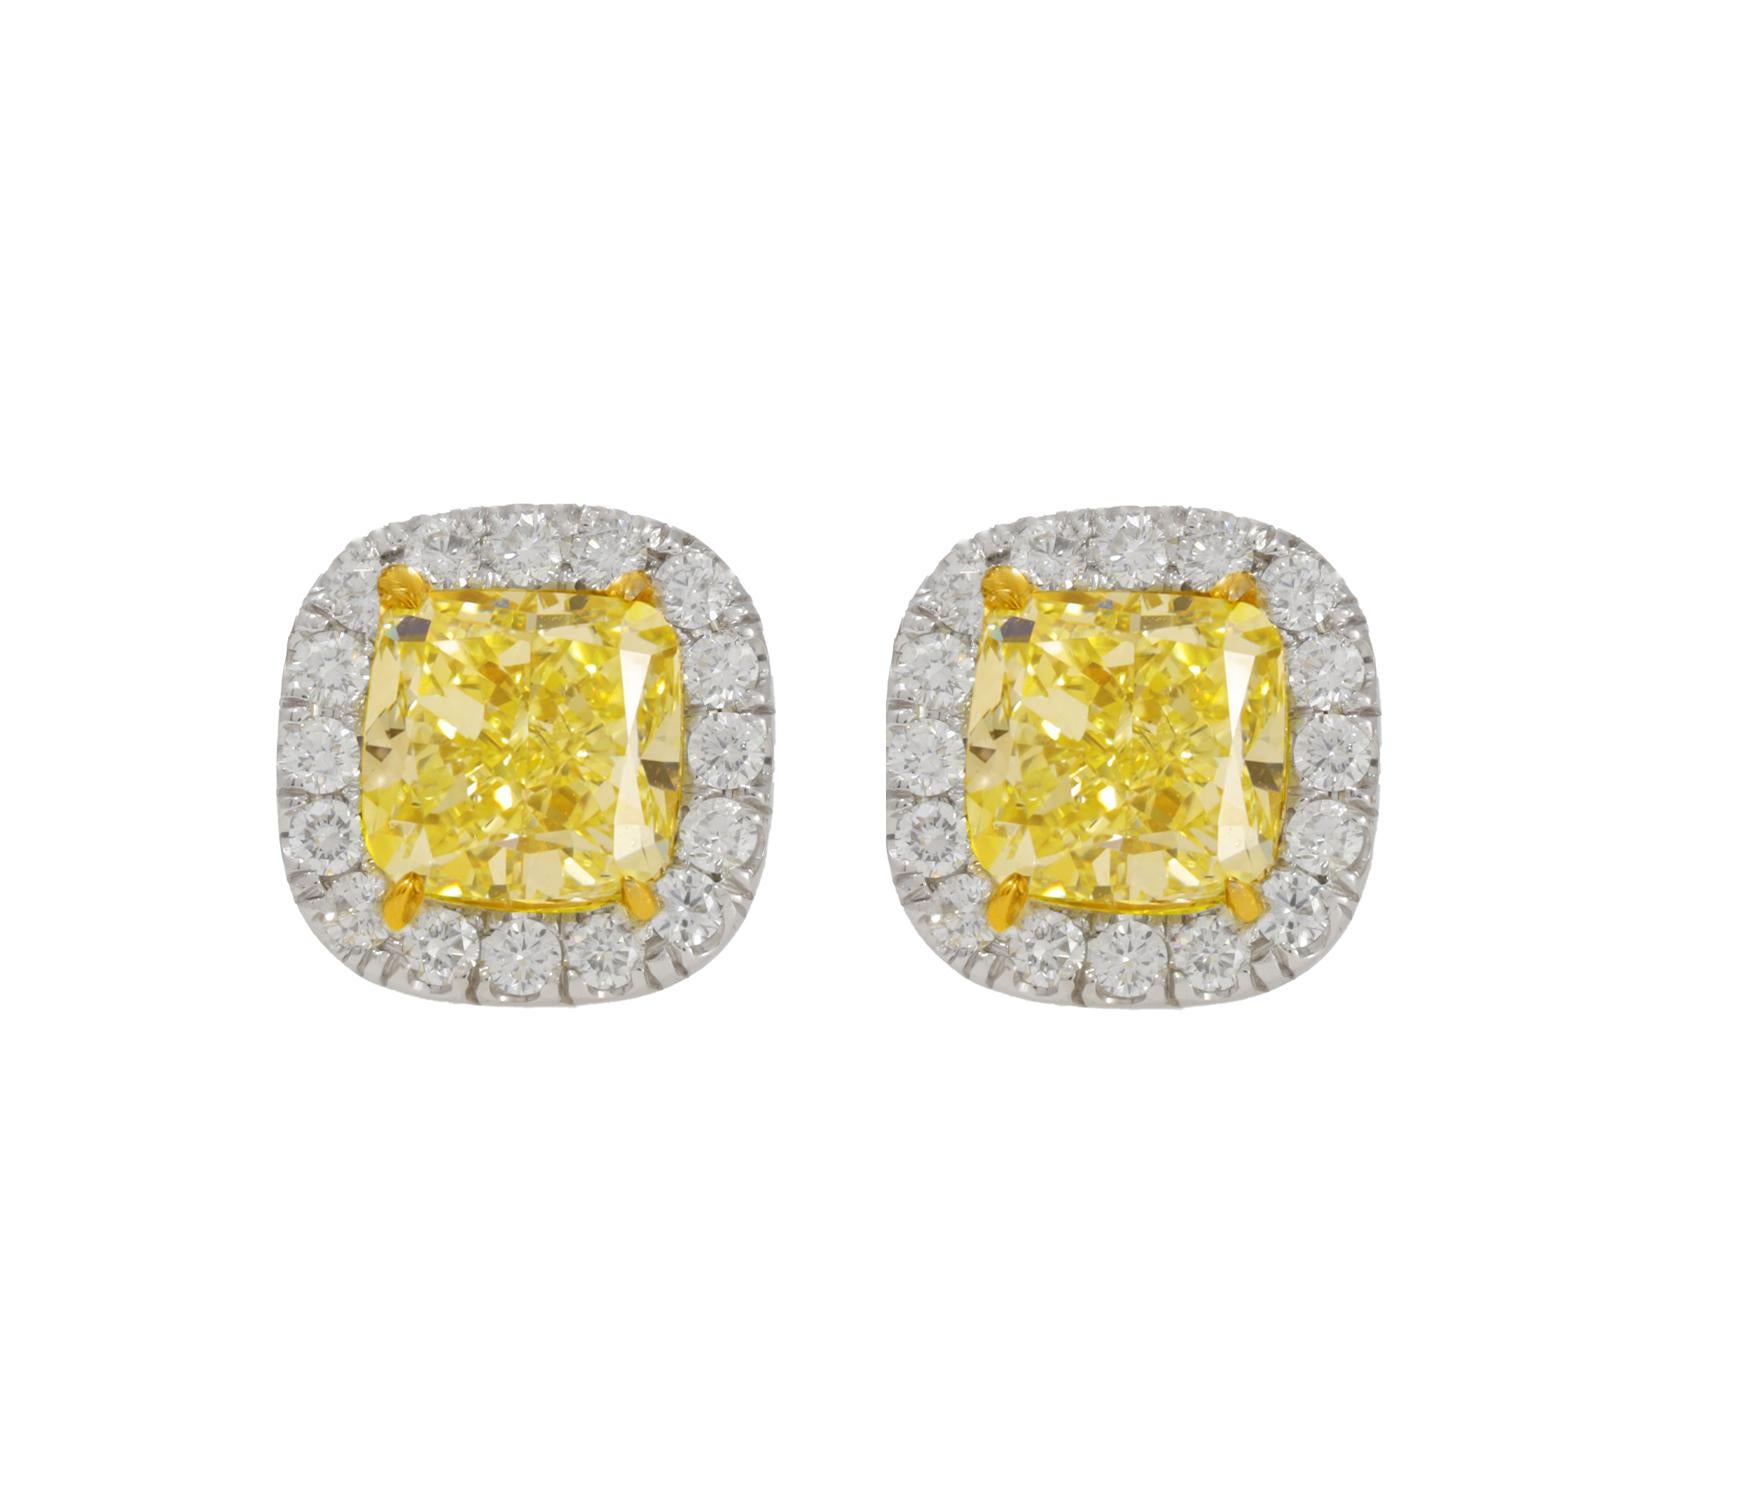 18KT WHITE GOLD DIAMOND STUDS, FEATURES 1.50CT + 1.51CT  OF TWO GIA CERTIFIED CUSHION CUT DIAMONDS FANCY YELLOW VS2-IN A DIAMOND HALO .40CTS OF DIAMONDS ON SIDES.
Diana M. is a leading supplier of top-quality fine jewelry for over 35 years.
Diana M